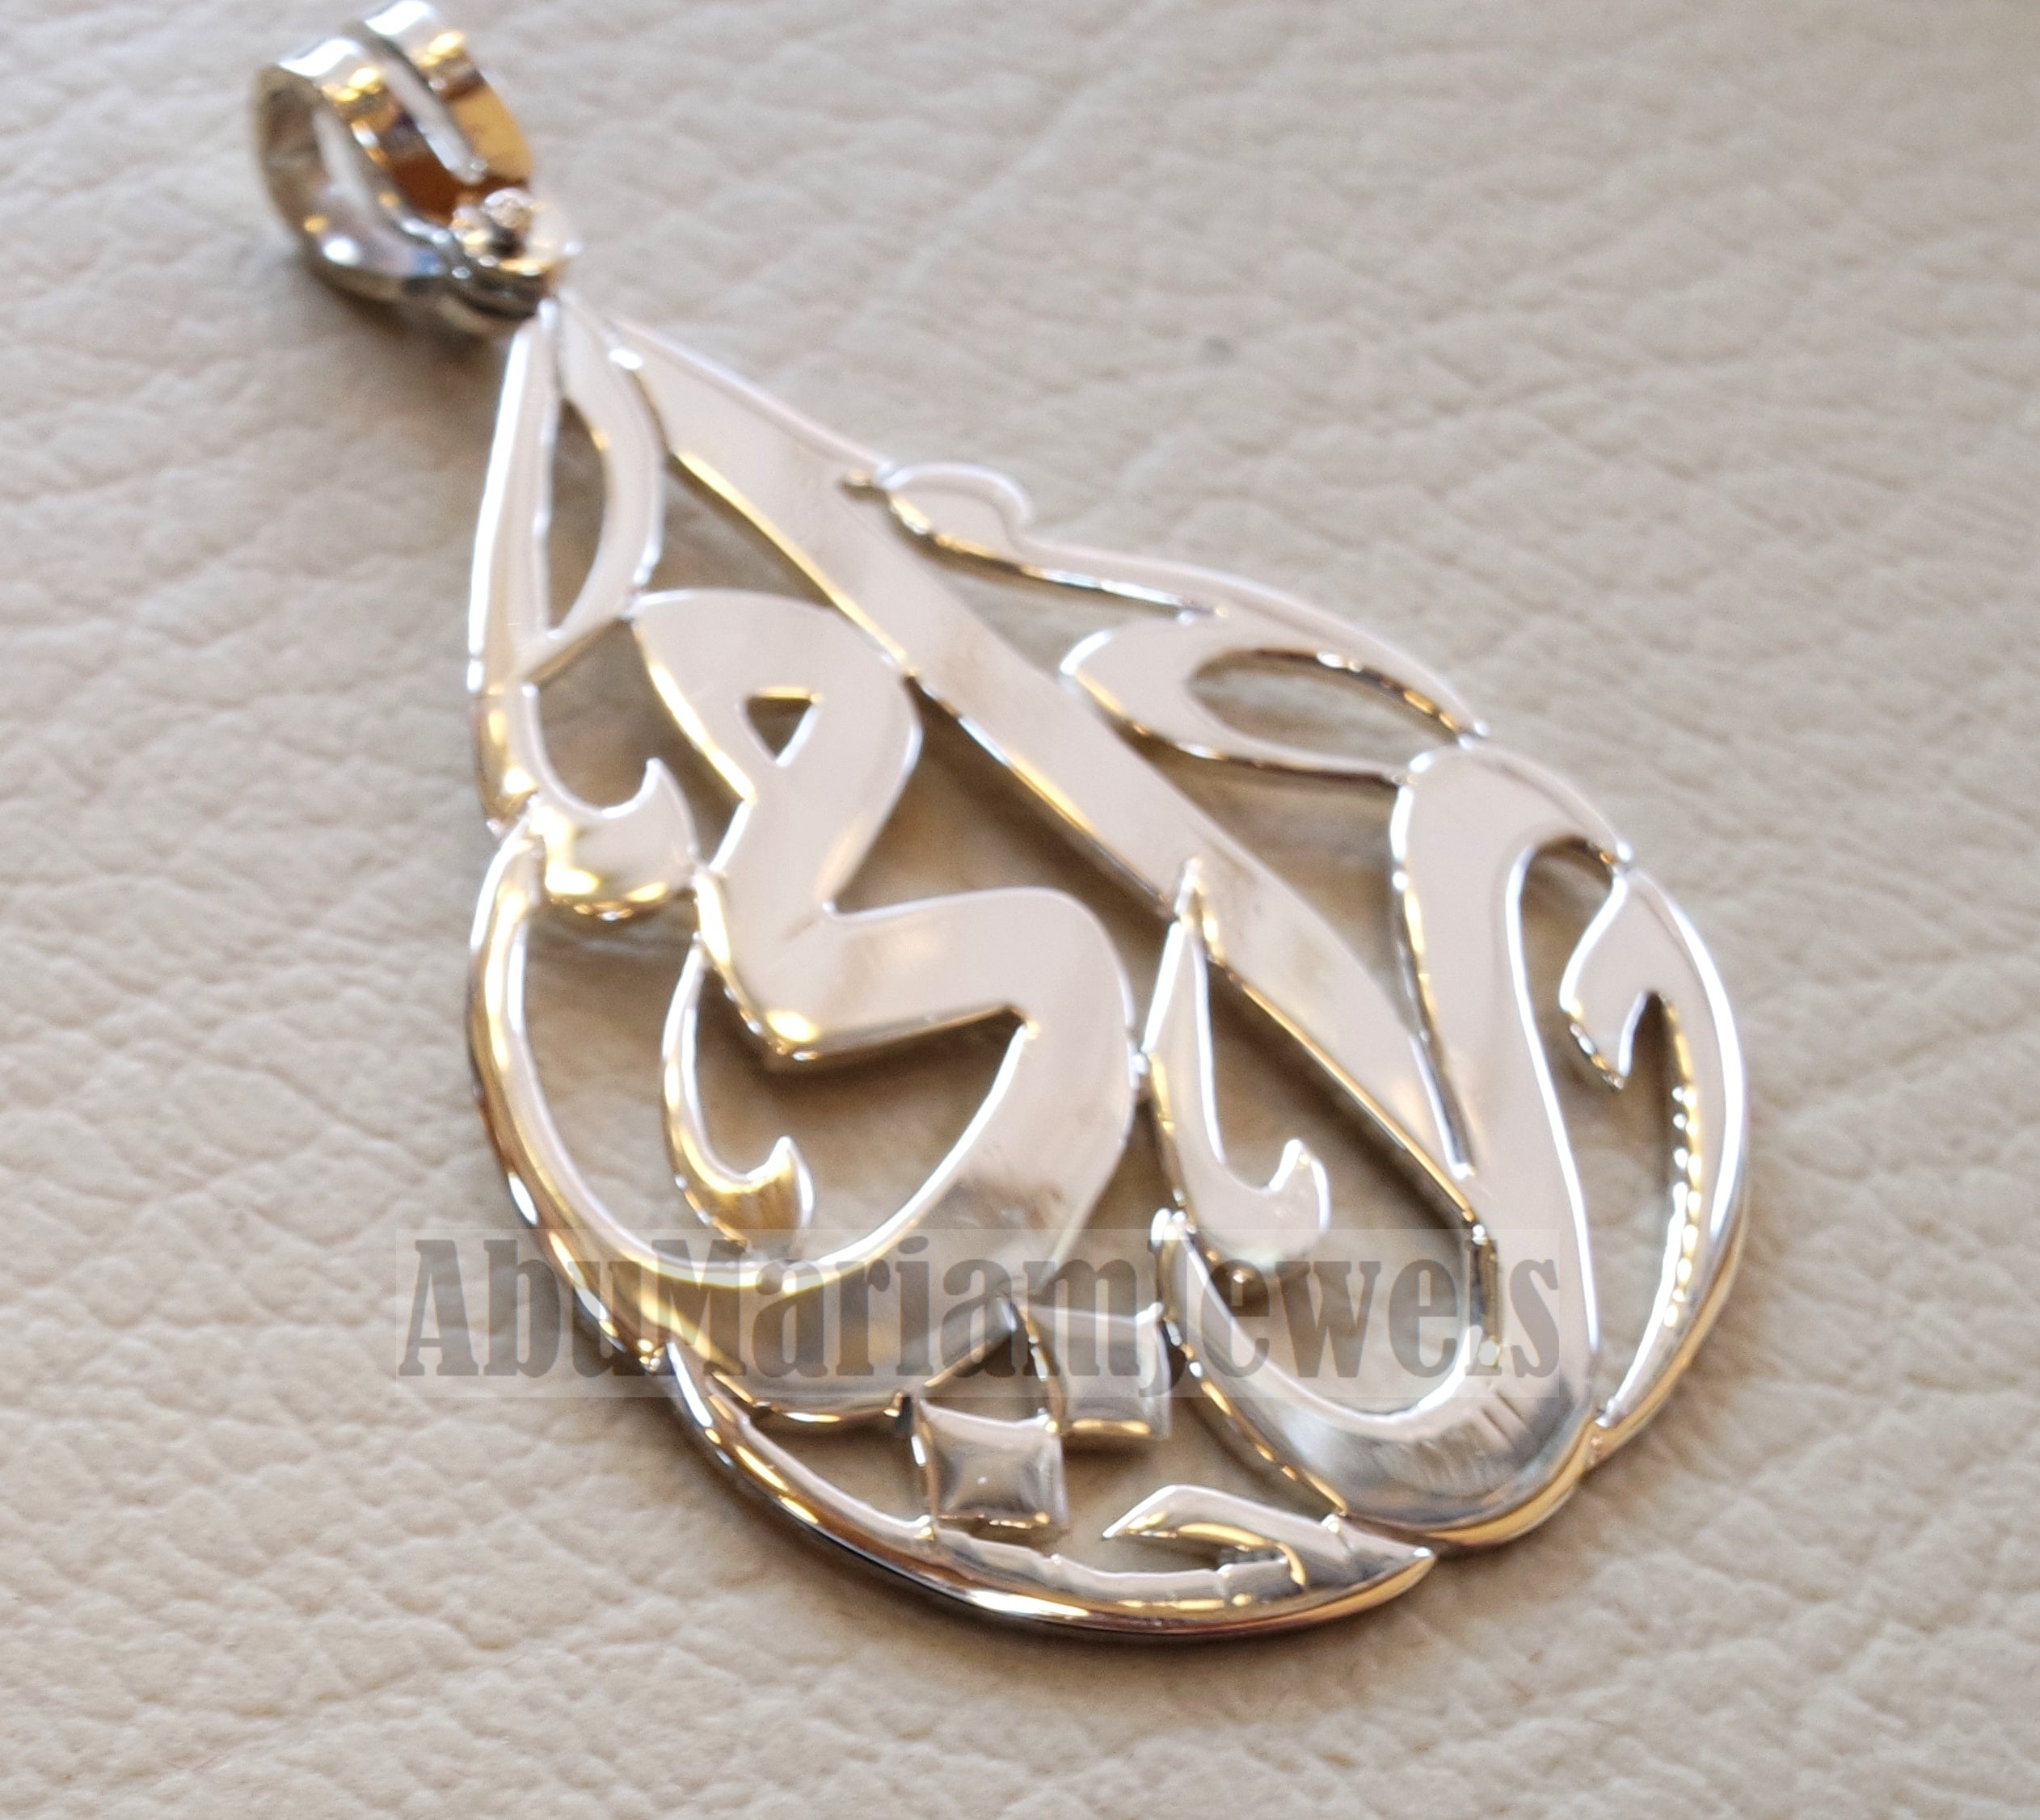 pendant any one or two names arabic made to order customized polish sterling silver 925 high quality big pear shape تعليقه اسماء عربي